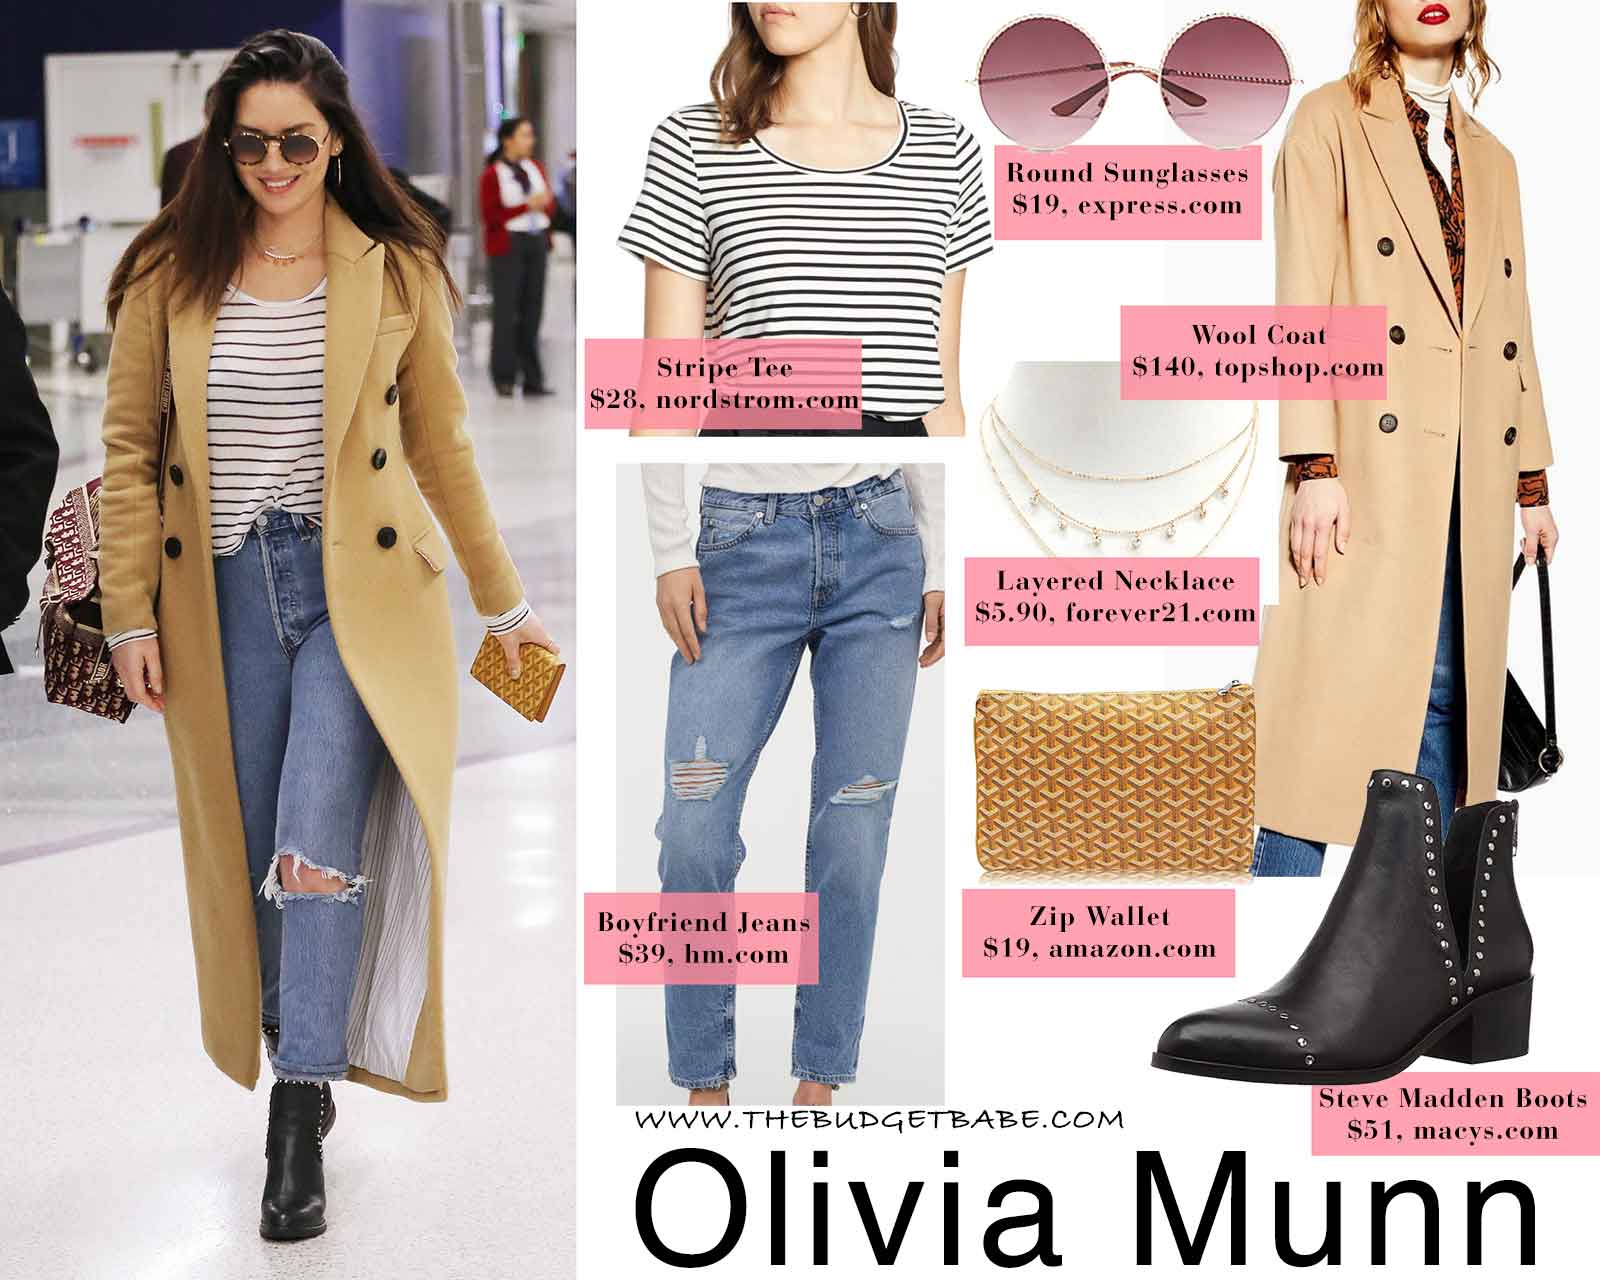 Olivia Munn's camel coat and striped tee, perfect everyday outfit!